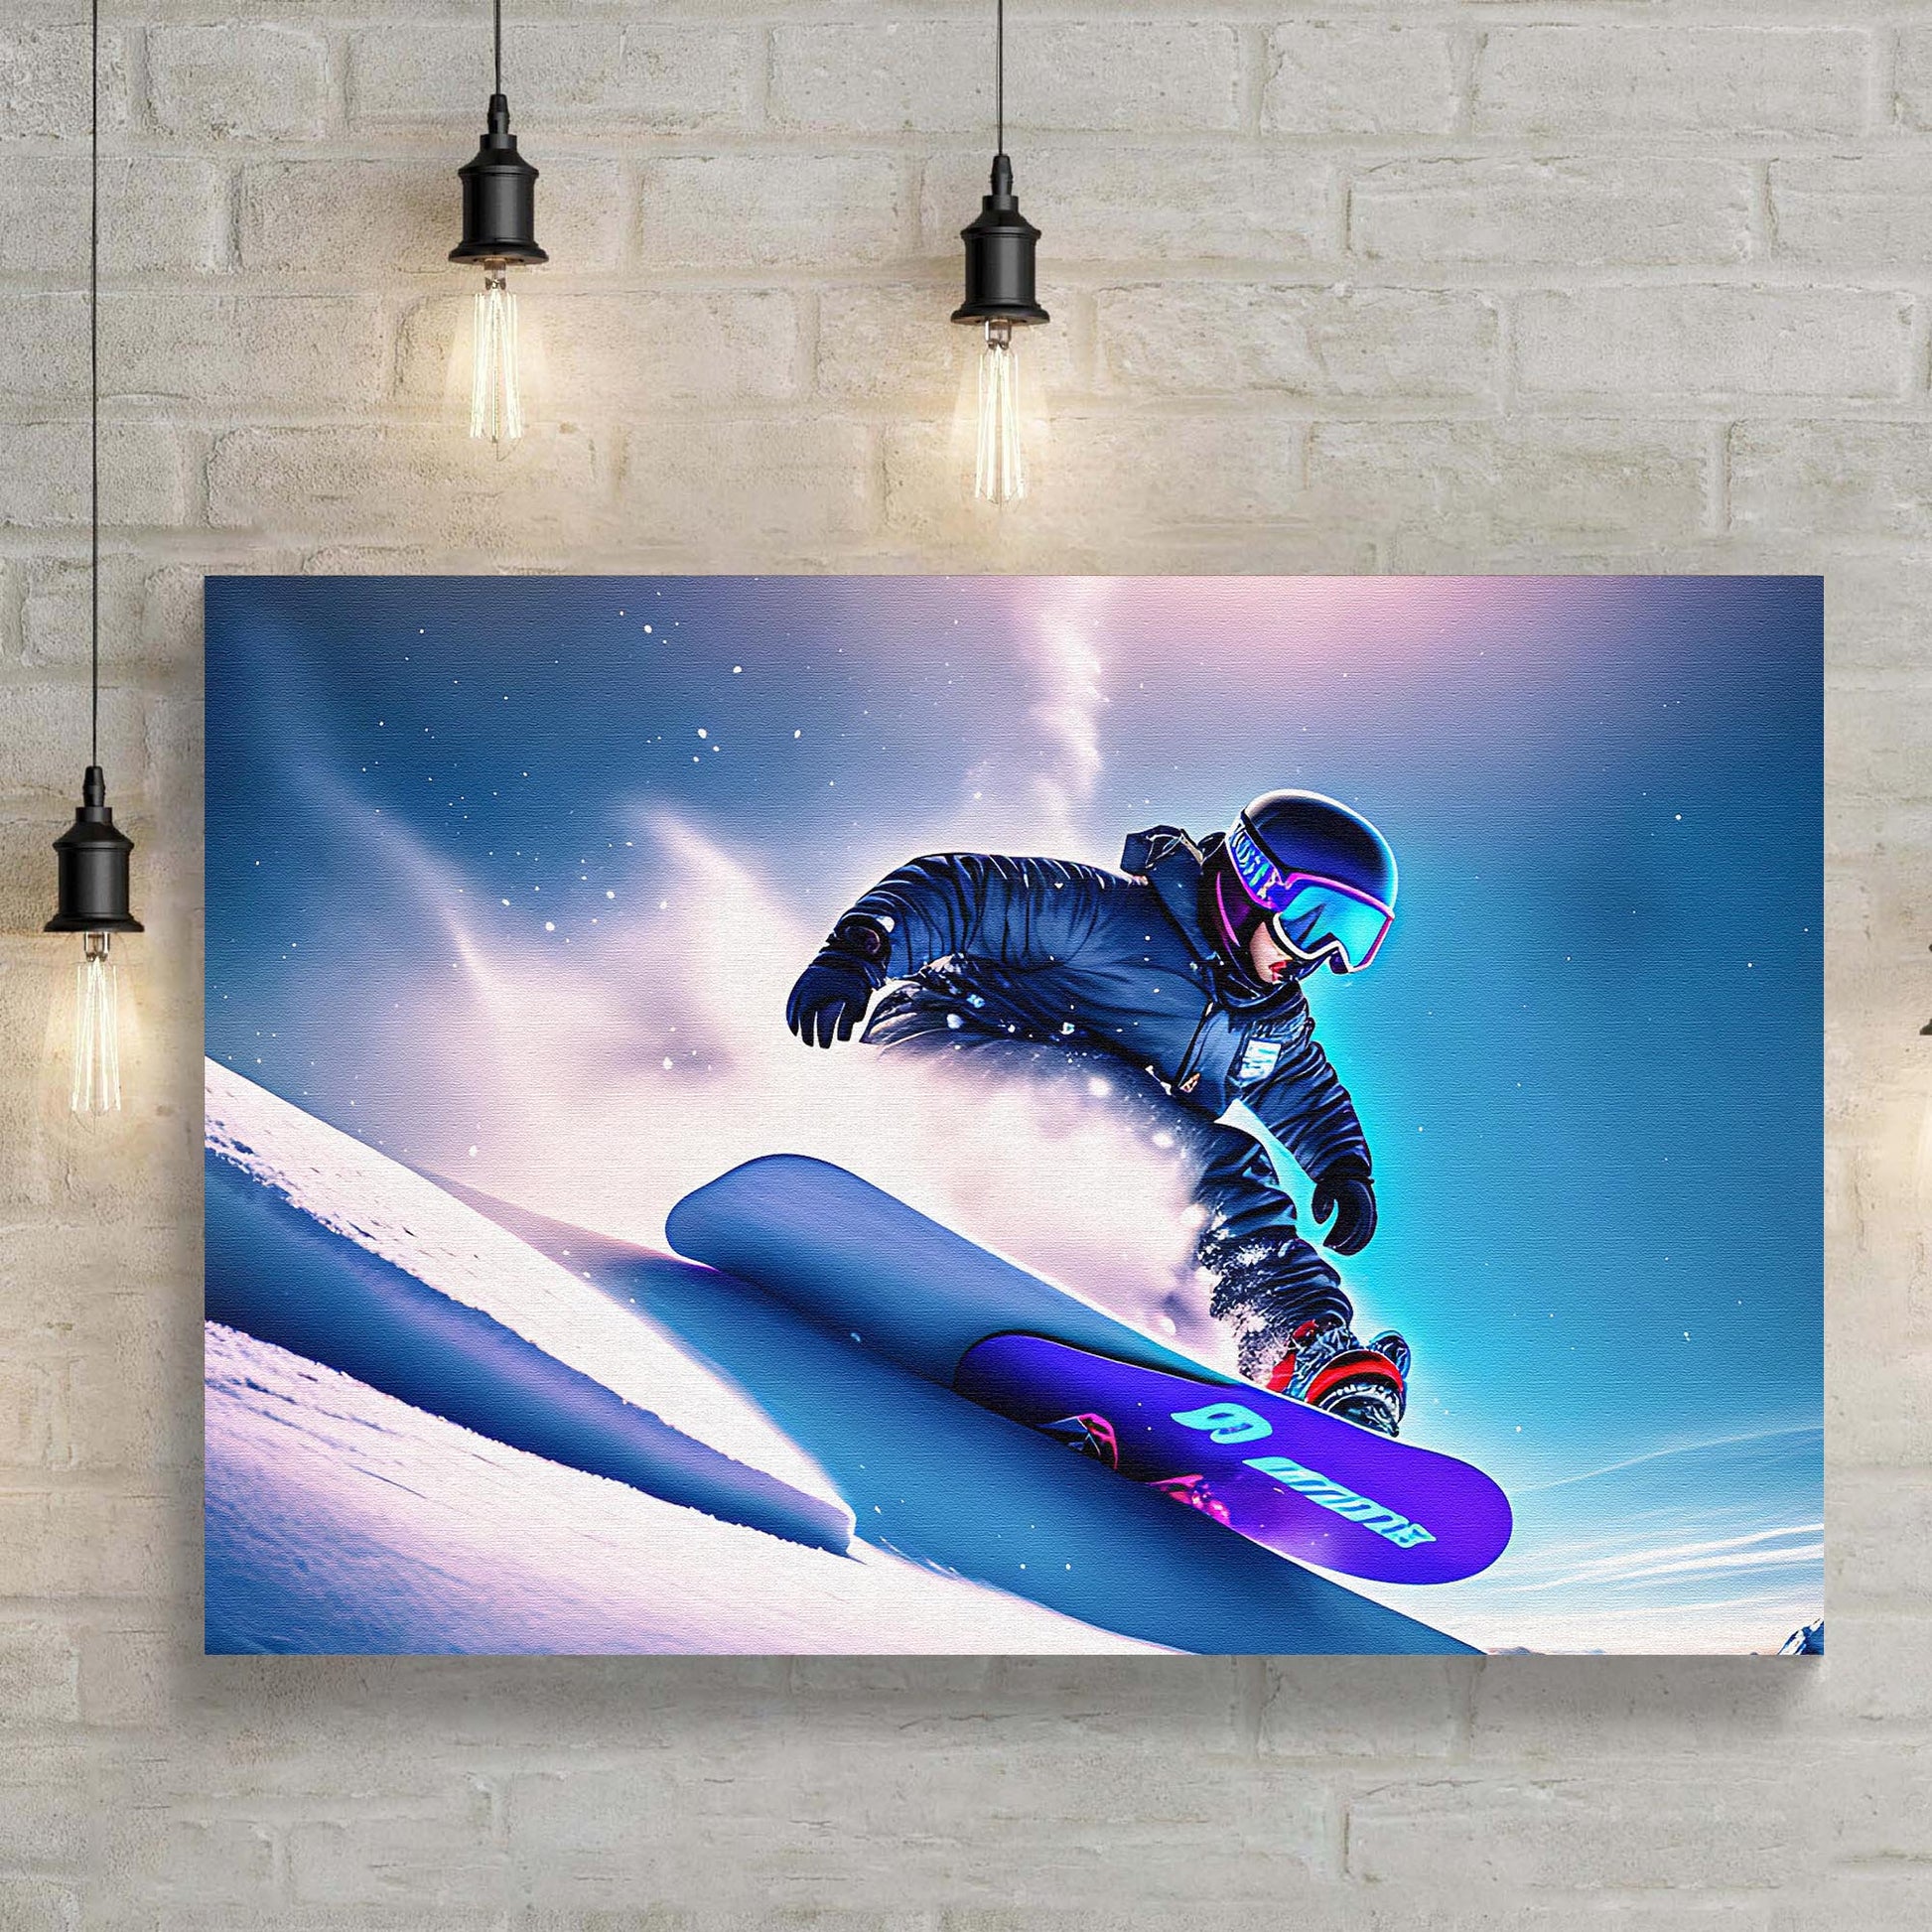 Snowboarding Downhill Canvas Wall Art - Image by Tailored Canvases